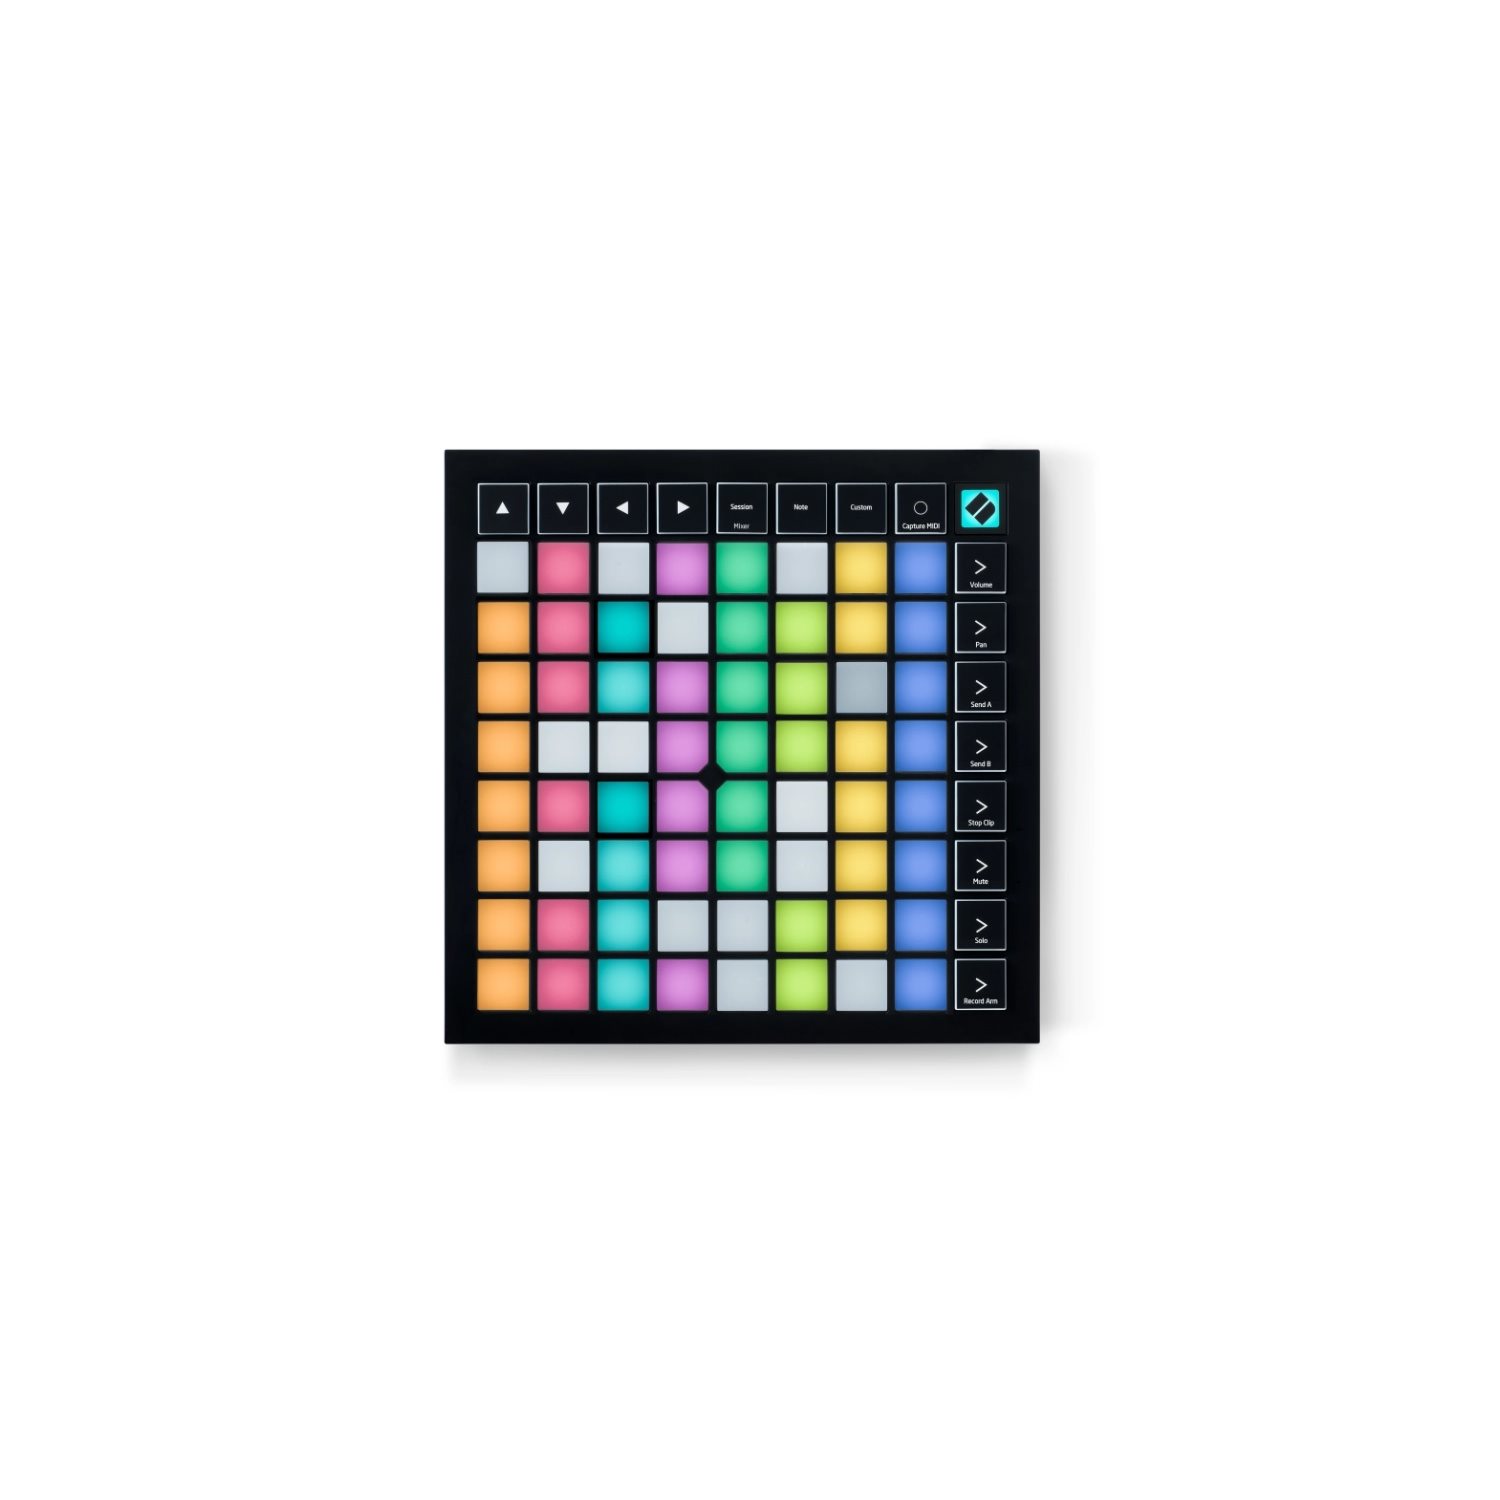 NOVATION - LAUNCHPAD-X - 64-pad MIDI Grid Controller for Ableton Live